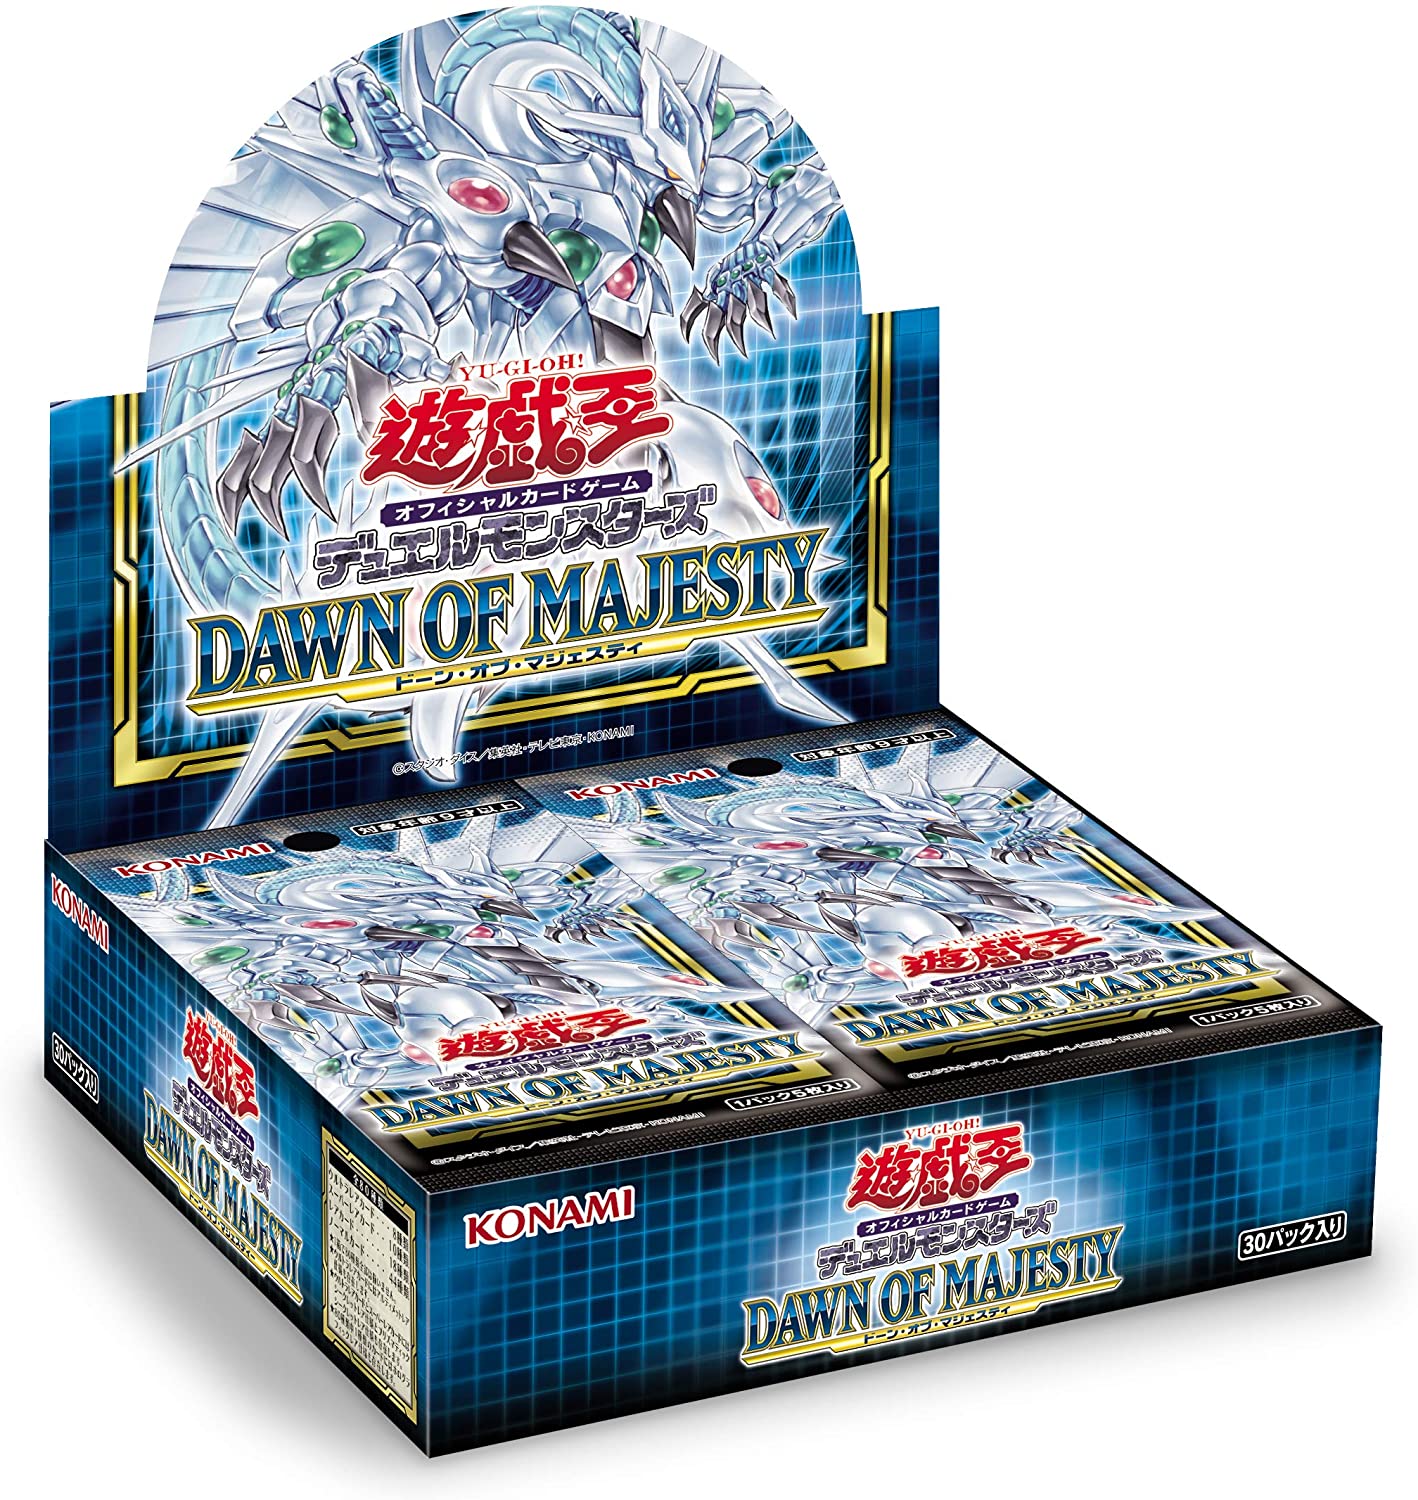 Yu-Gi-Oh! Official Card Game Duel Monsters ｢DAWN OF MAJESTY｣ Box